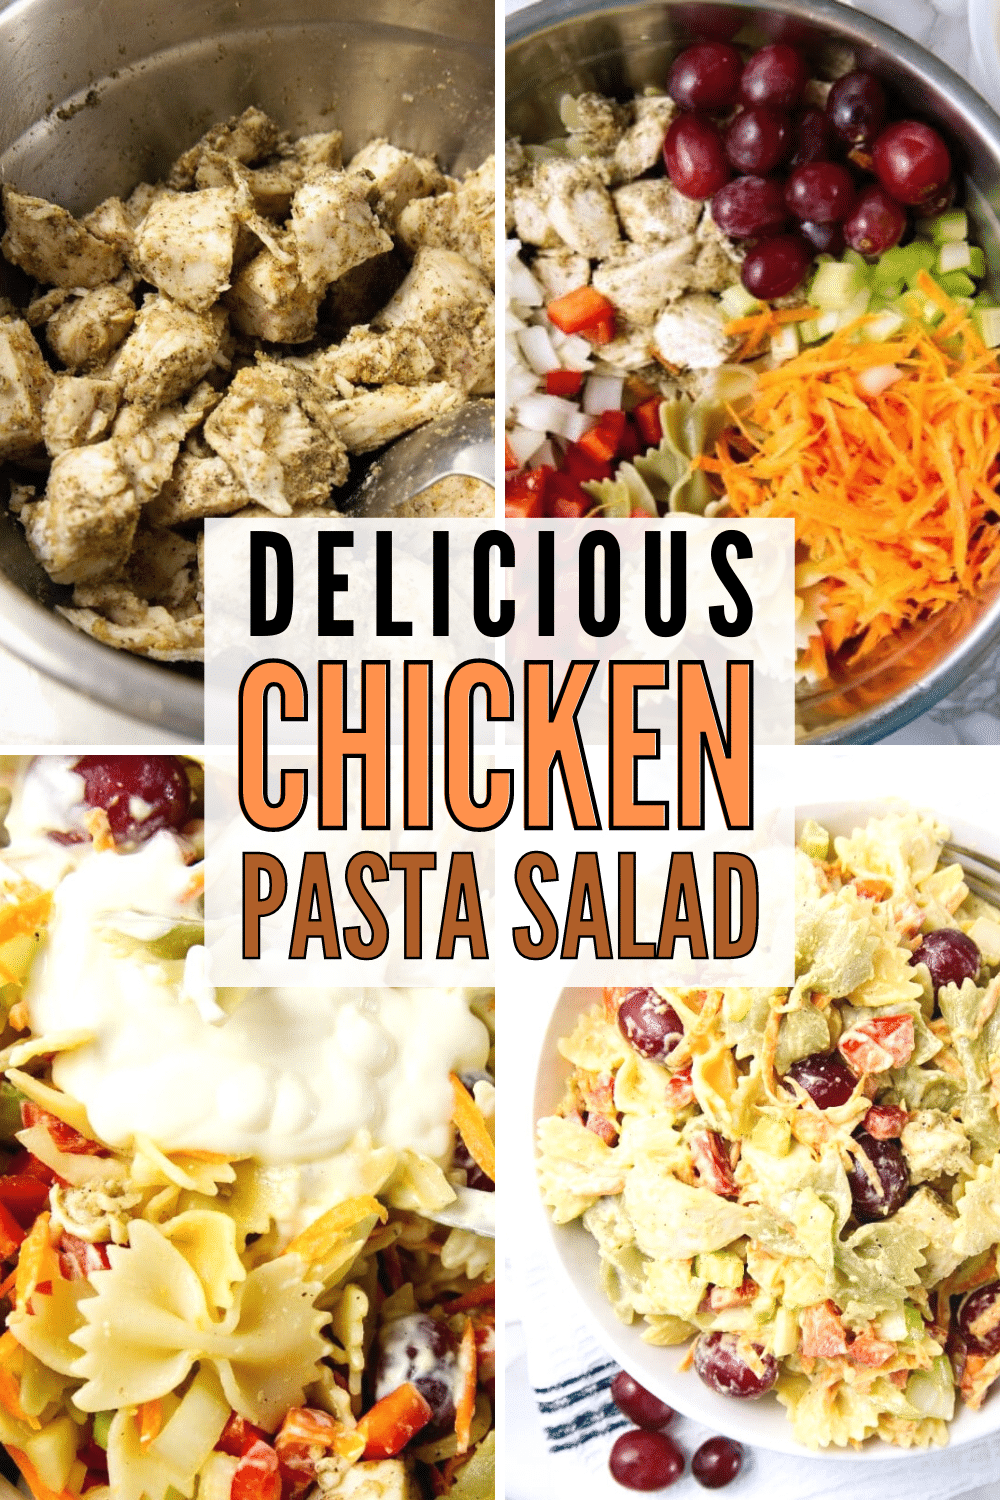 This is the absolute BEST chicken pasta salad. Great texture, flavor, colors, and it gets better the longer it sits! #pastasalad #chicken #salad via @wondermomwannab